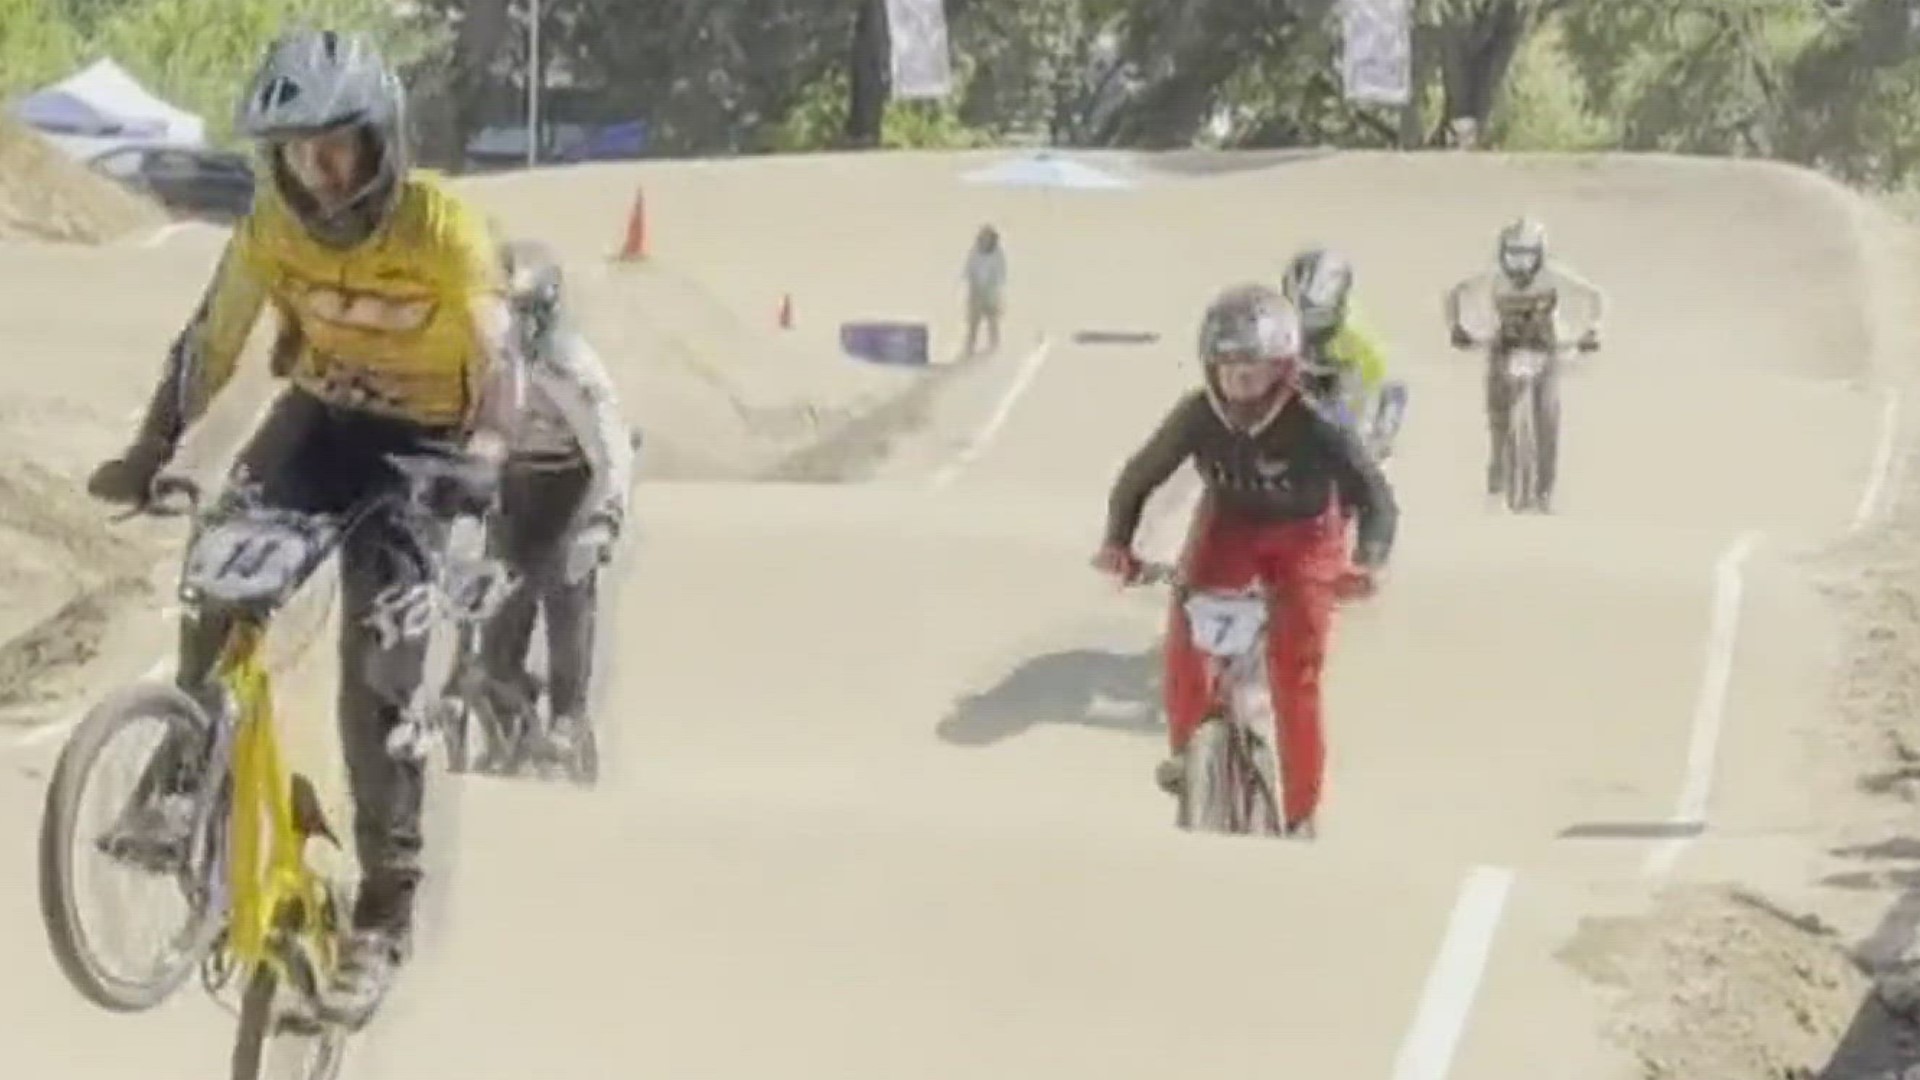 Racers from preschool to past retirement are competing in Roseville for the BMX racing finals Sunday.